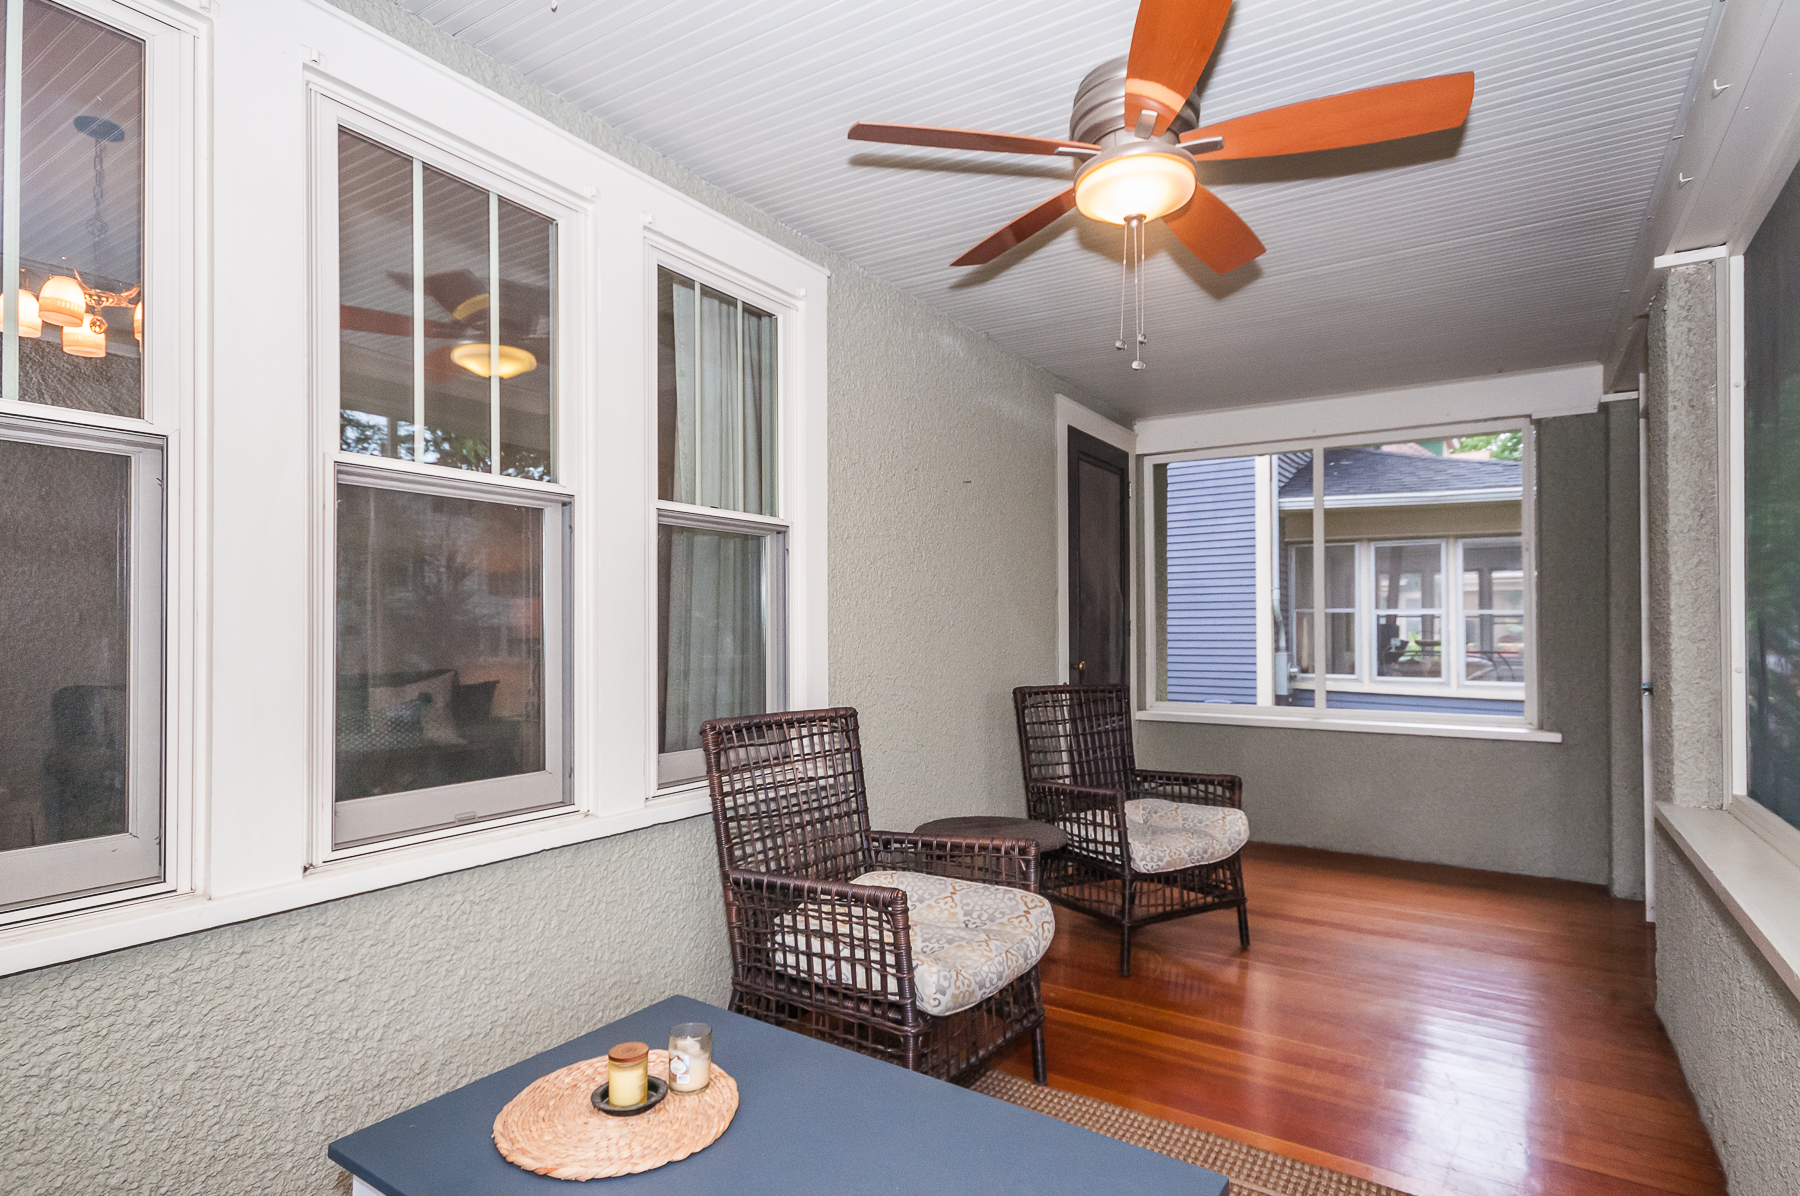 Front porch: The screened-in porch is great for morning coffee or a nice place to unwind after a long day